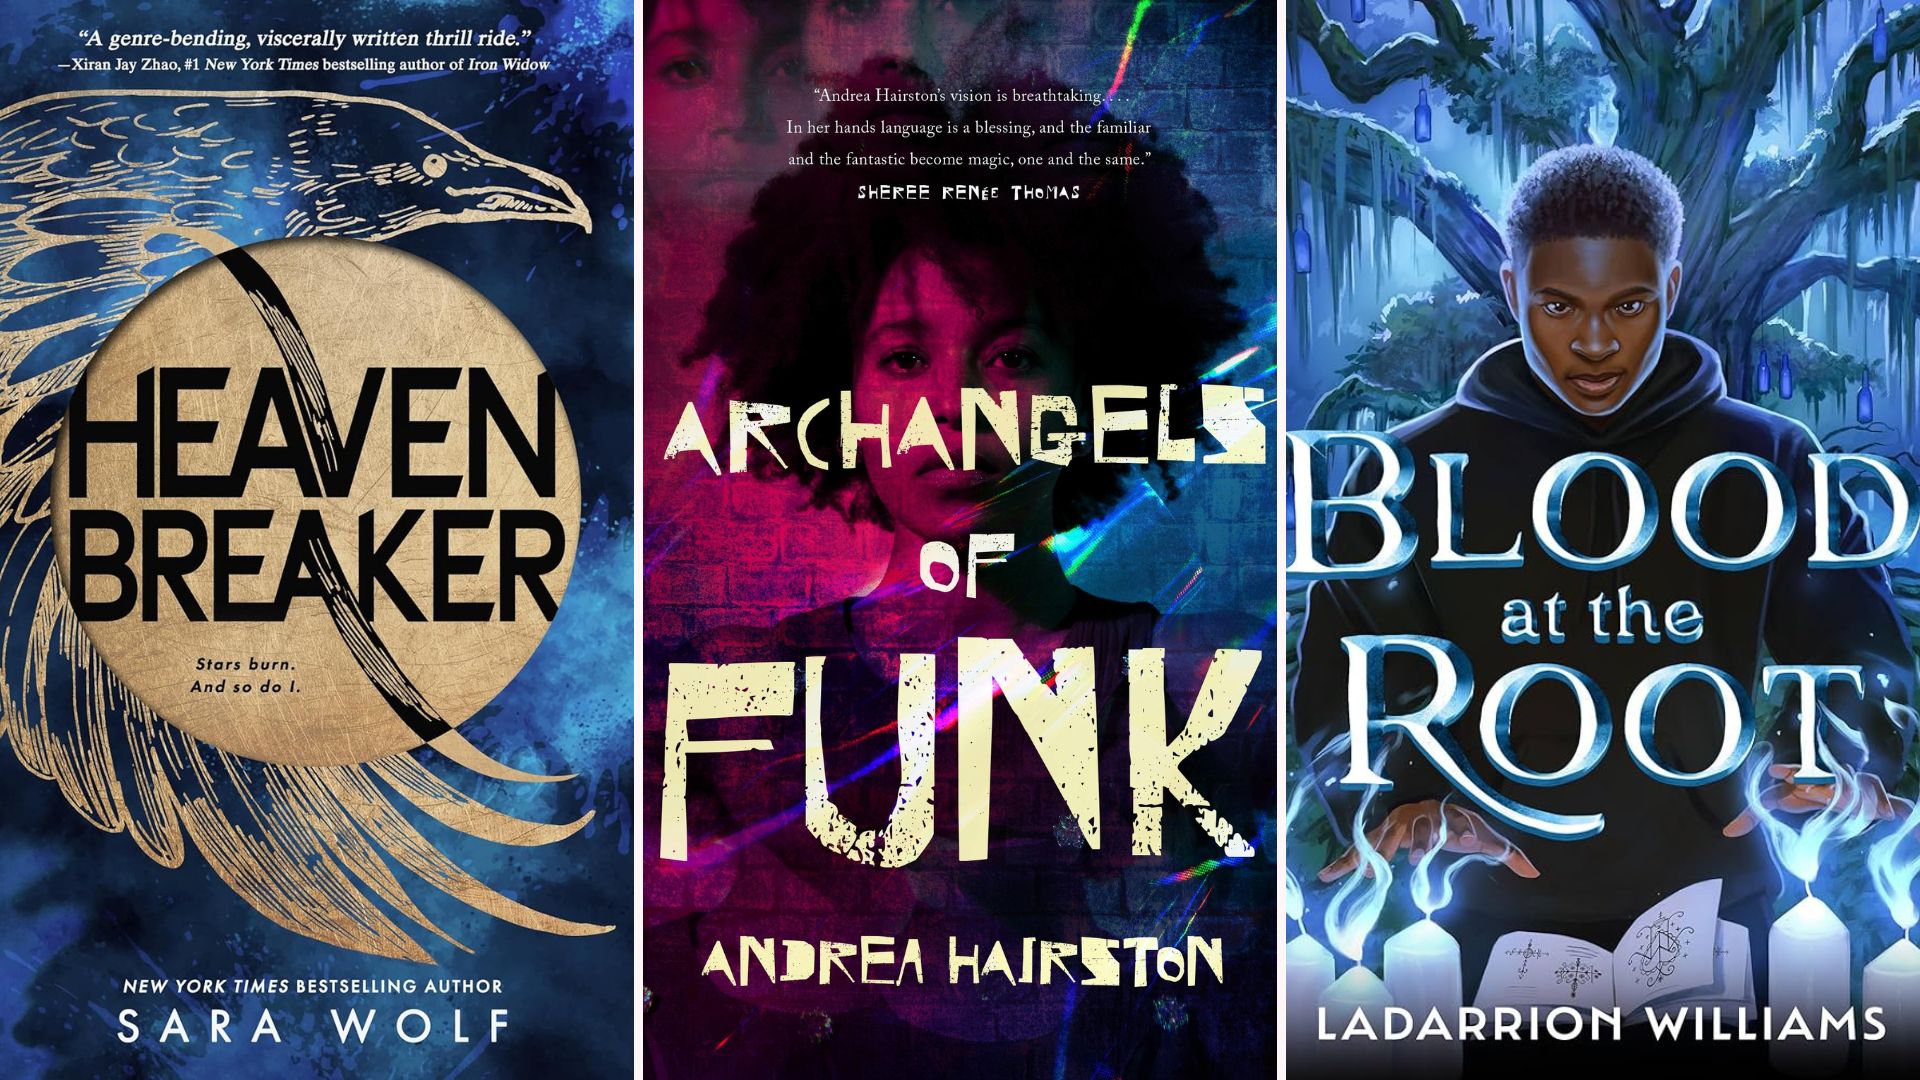 Book covers for Heavenbreaker, Archangels of Funk, and Blood at the Root